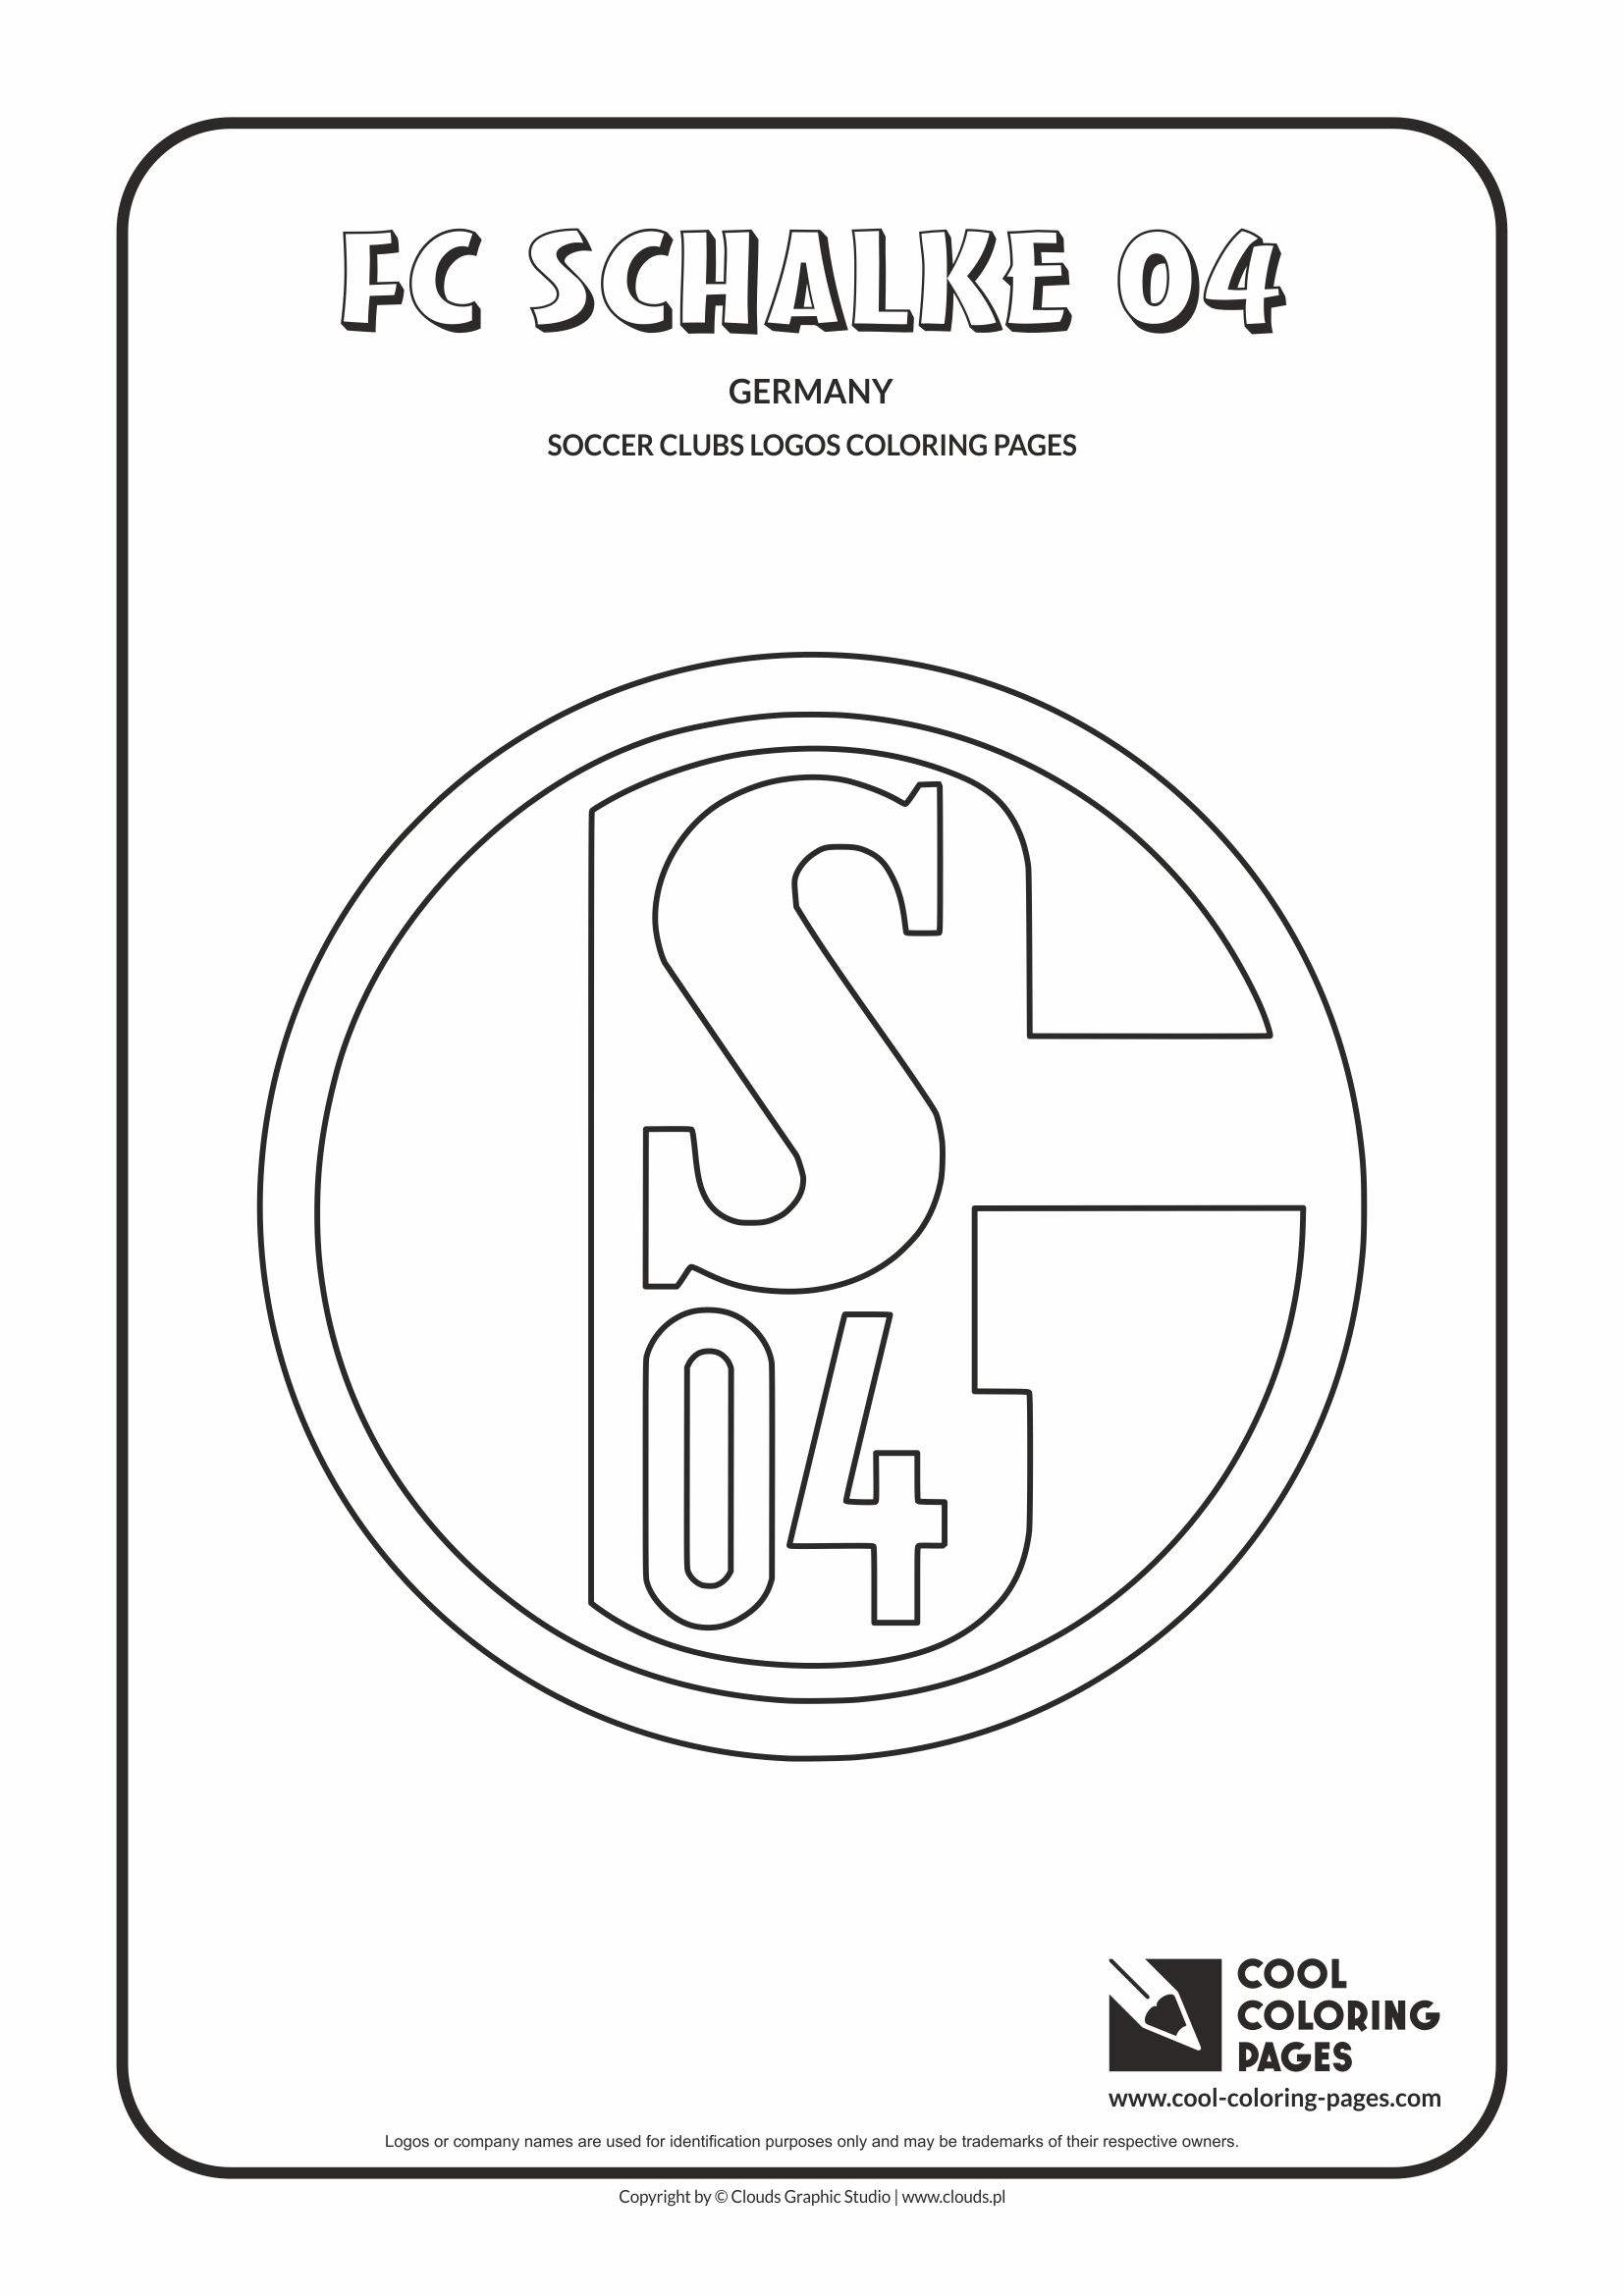 Cool coloring pages fc schalke logo coloring page